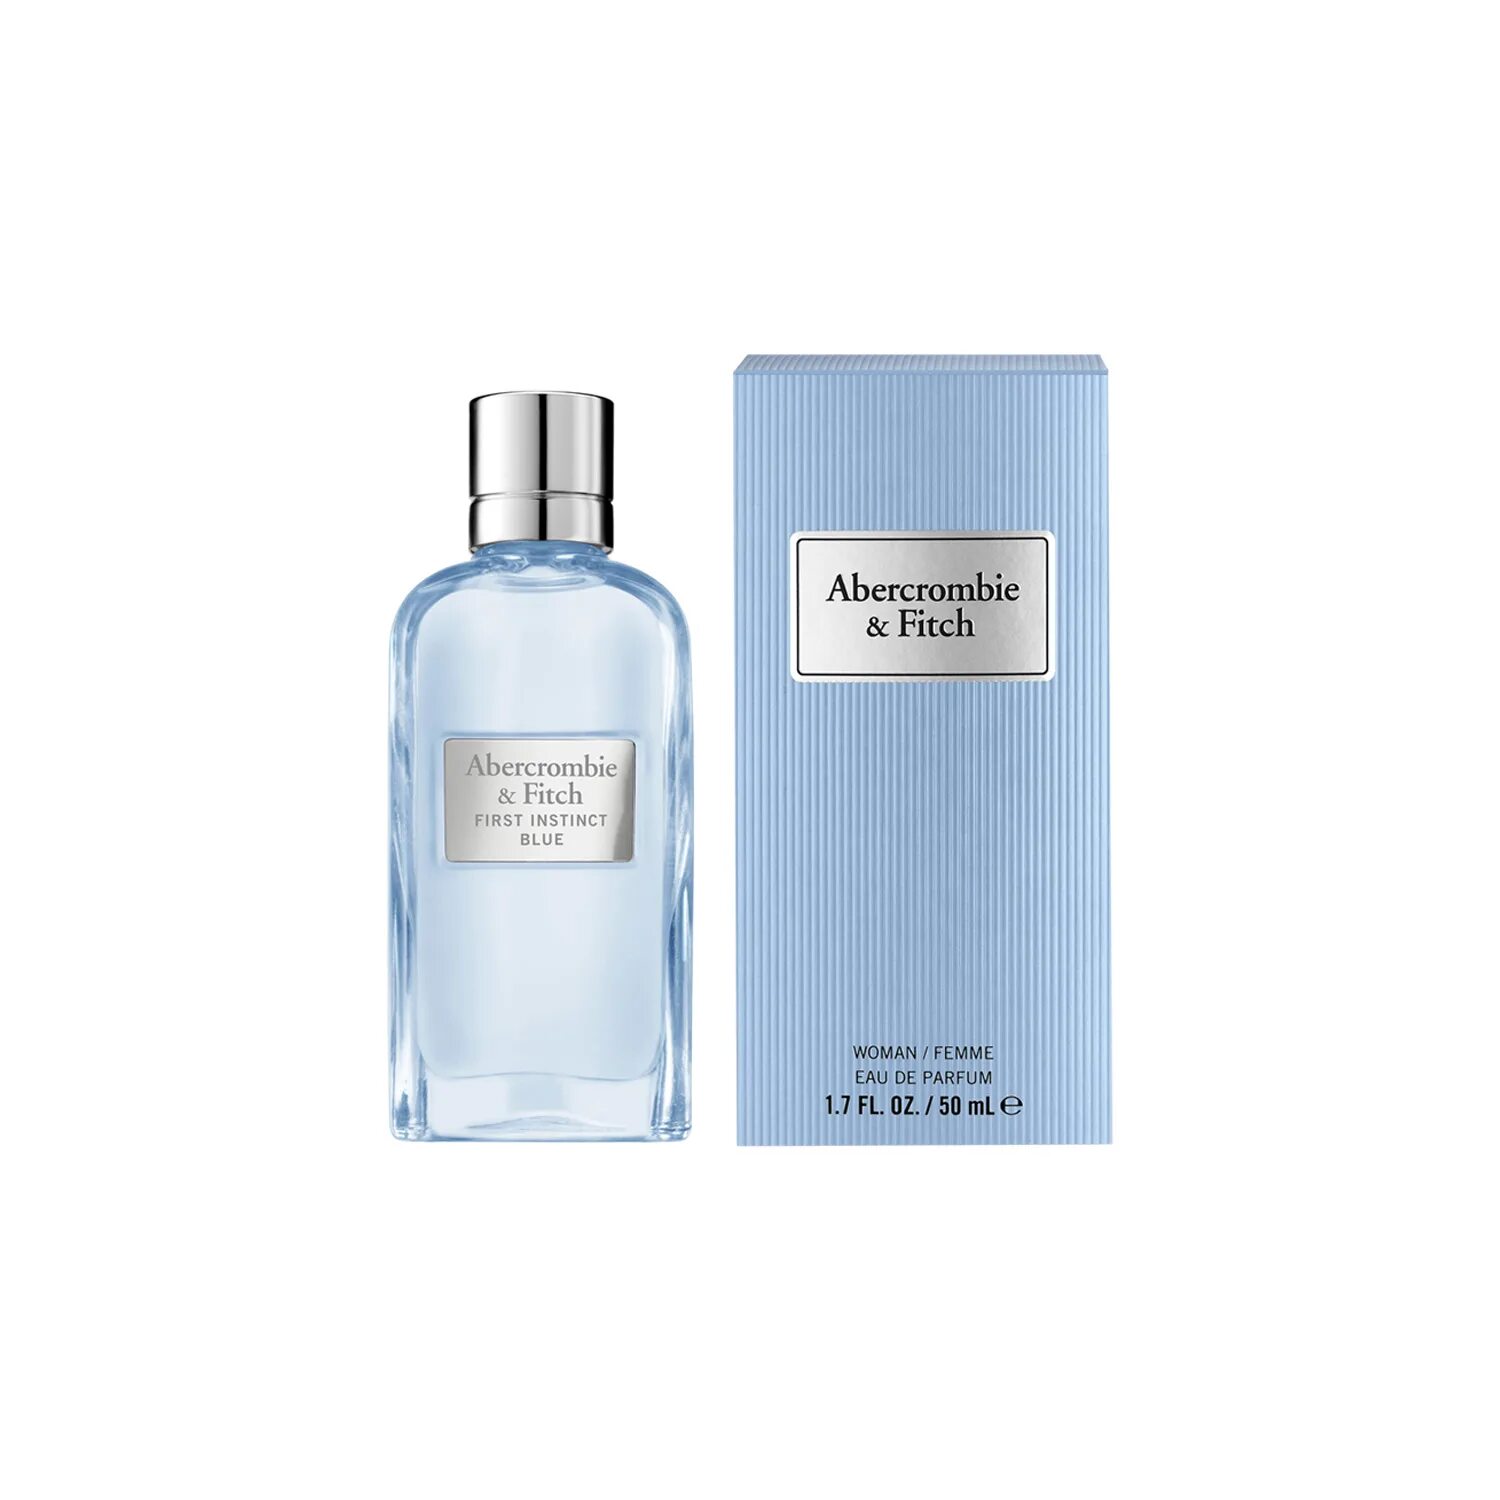 Abercrombie fitch first instinct blue. Парфюмерная вода Abercrombie Fitch. Abercrombie and Fitch first Instinct Blue for him 50 мл. Abercrombie Fitch first Instinct woman.